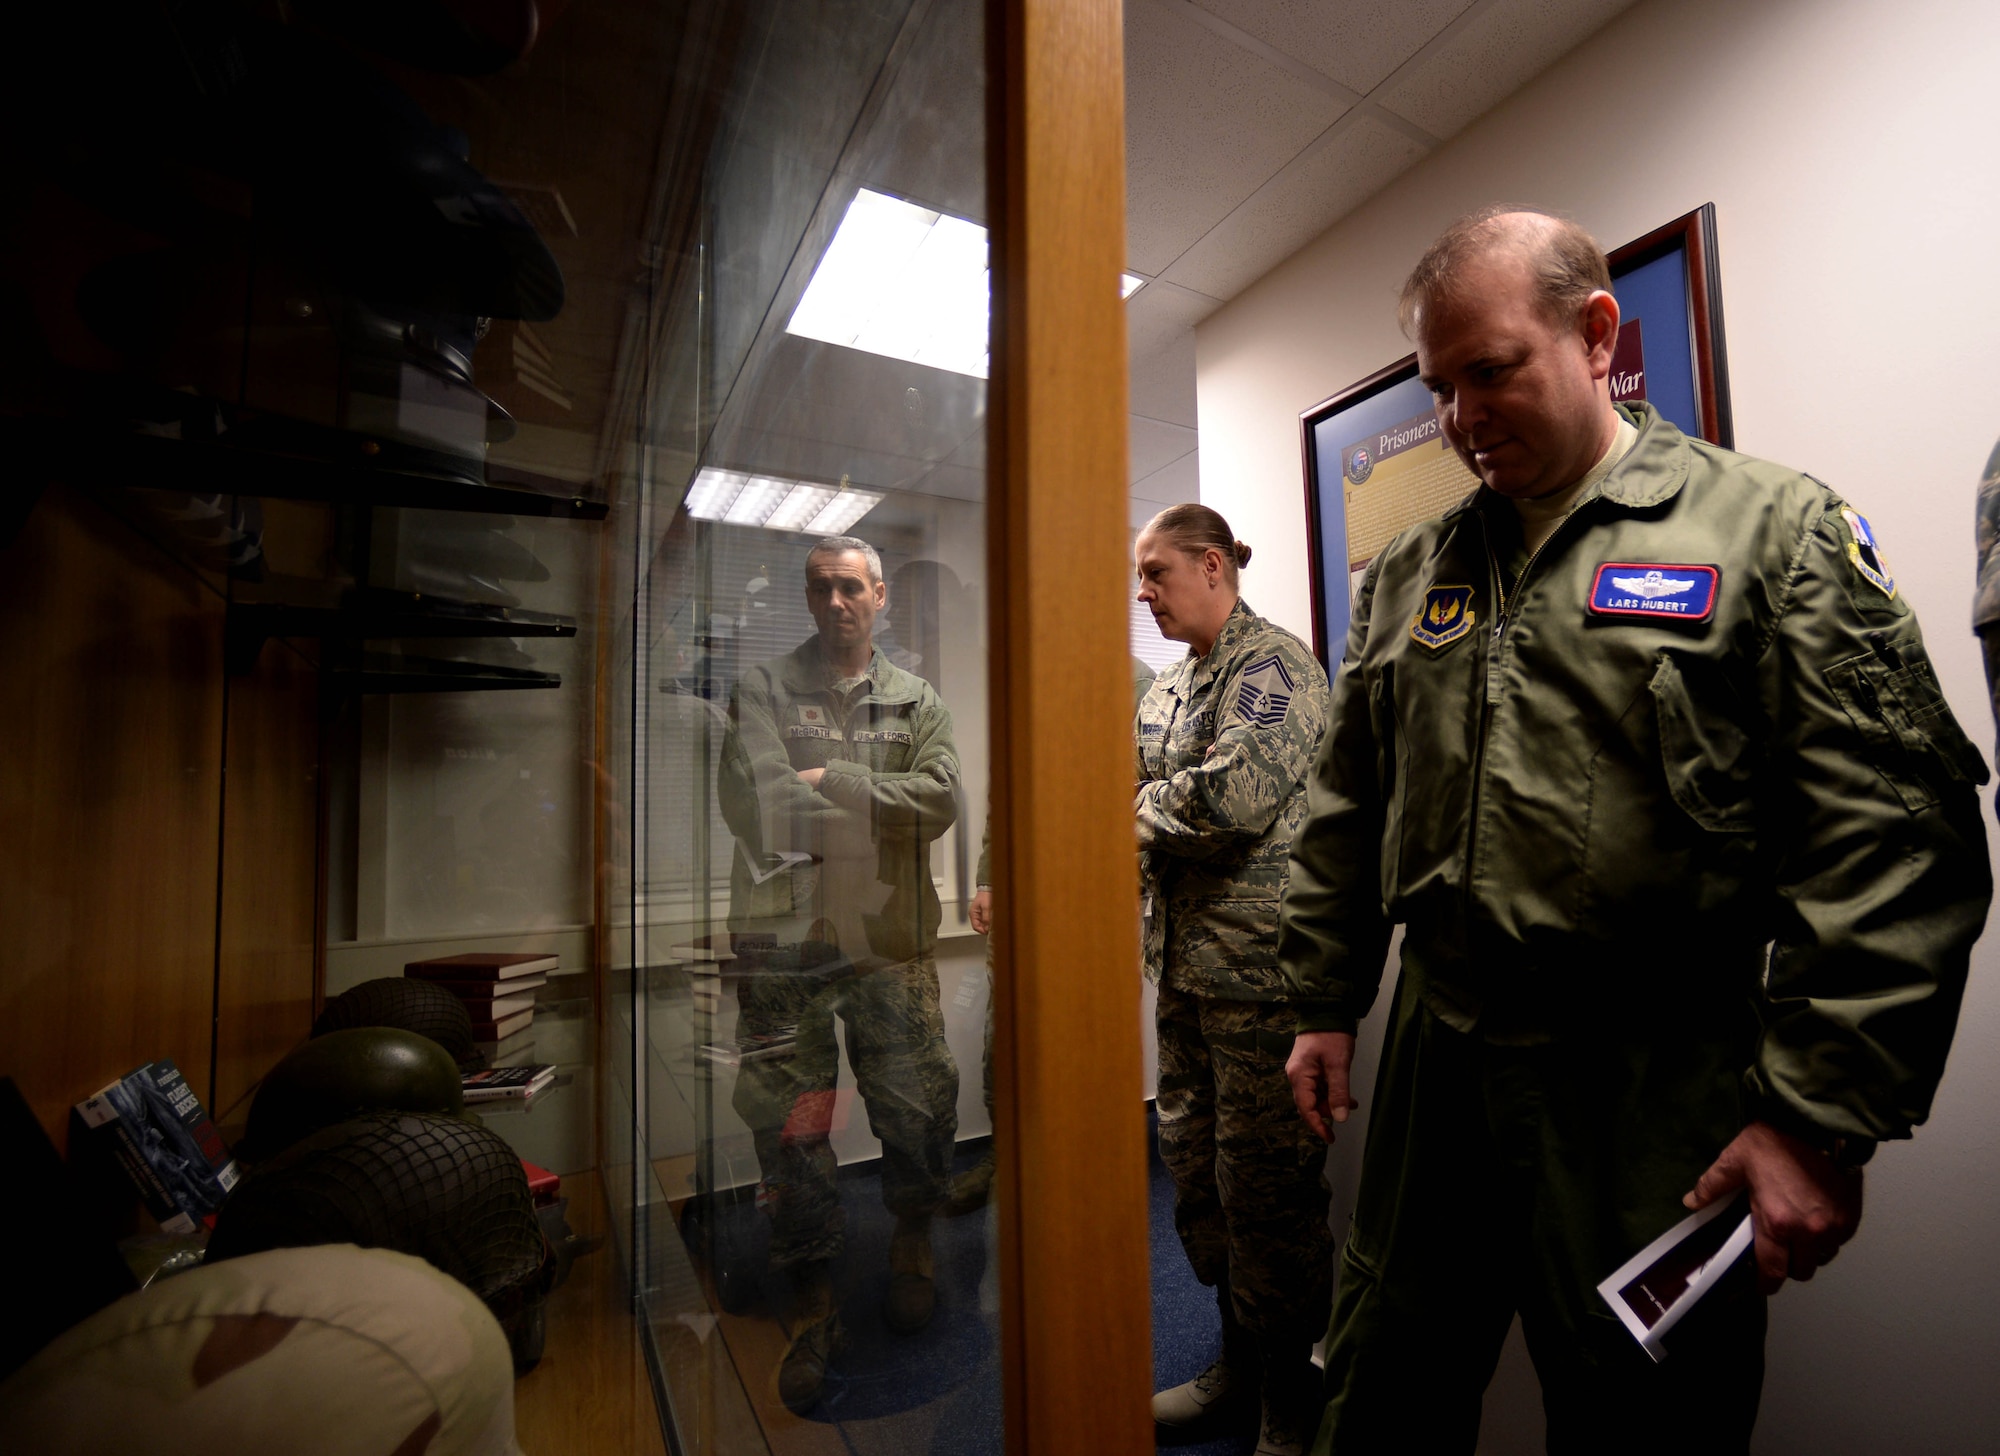 U.S. Air Force Col. Lars Hubert, 52nd Fighter Wing vice commander, looks at a display case while touring the Pitsenbarger Heritage Room after its ribbon-cutting ceremony in the Pitsenbarger Airman Leadership School at Spangdahlem Air Base, Germany, March 4, 2015. The room opened for viewing and tours upon the completion of the ribbon-cutting ceremony and contained various displays in remembrance of U.S. Air Force heritage and history. (U.S. Air Force photo by Airman 1st Class Timothy Kim/Released)